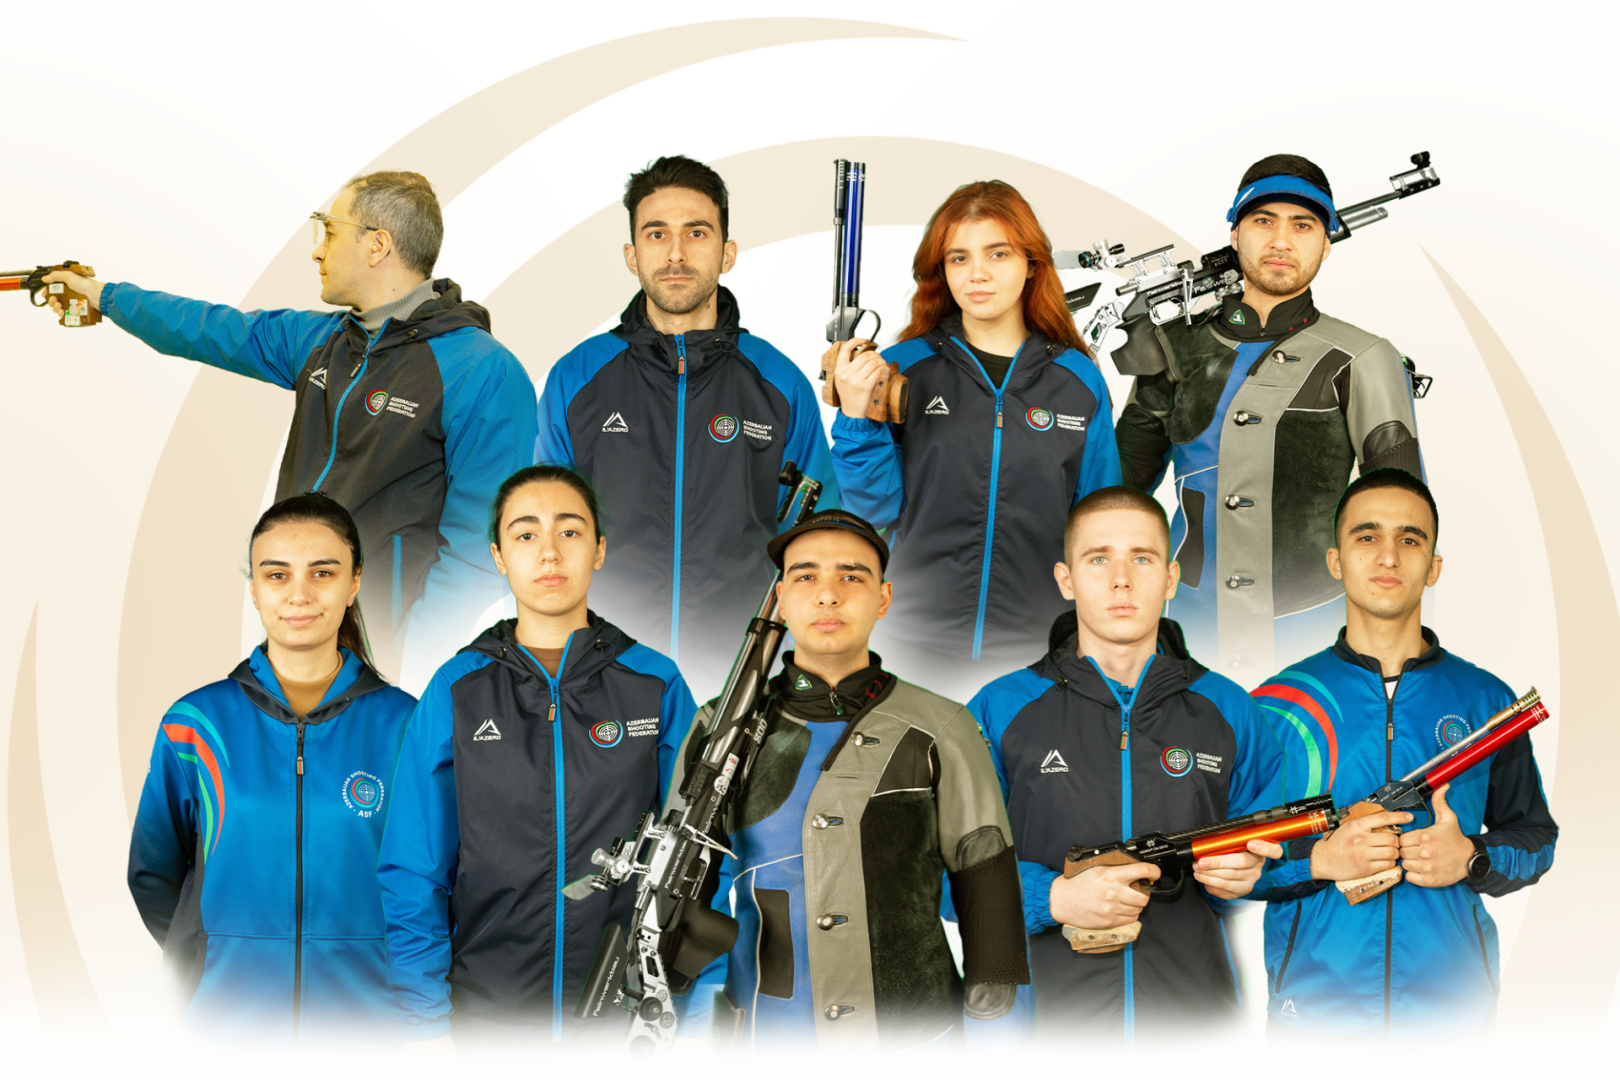 Azerbaijani national team will go to Munich with 10 snipers